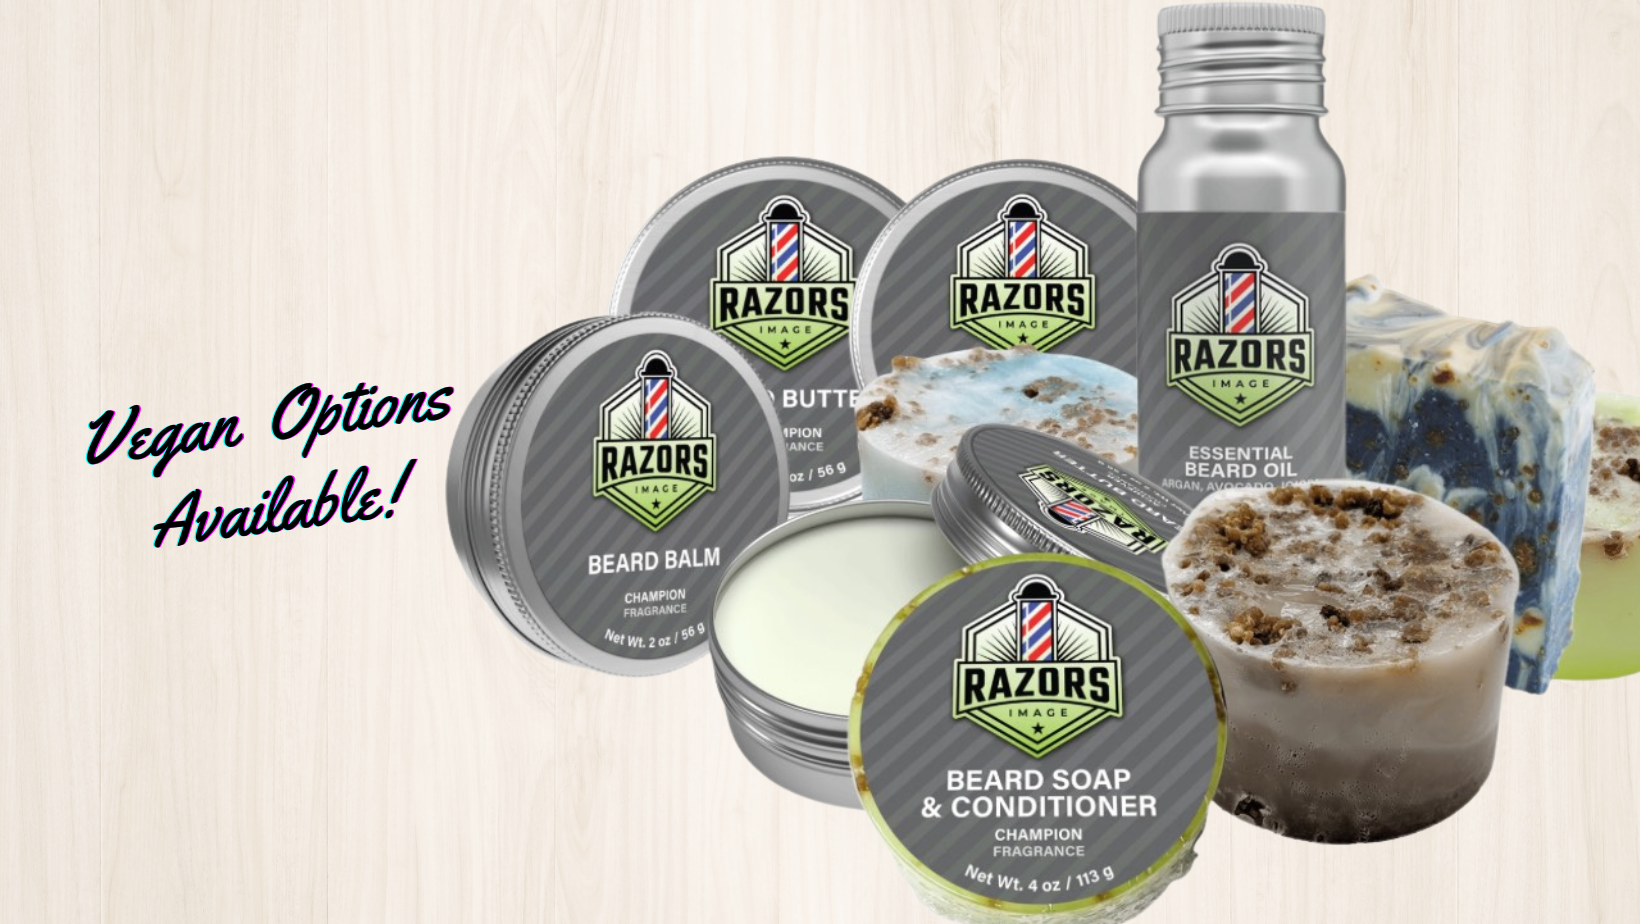 Collection of Razors Image Beard Care Products including balm, butter, oil and soap